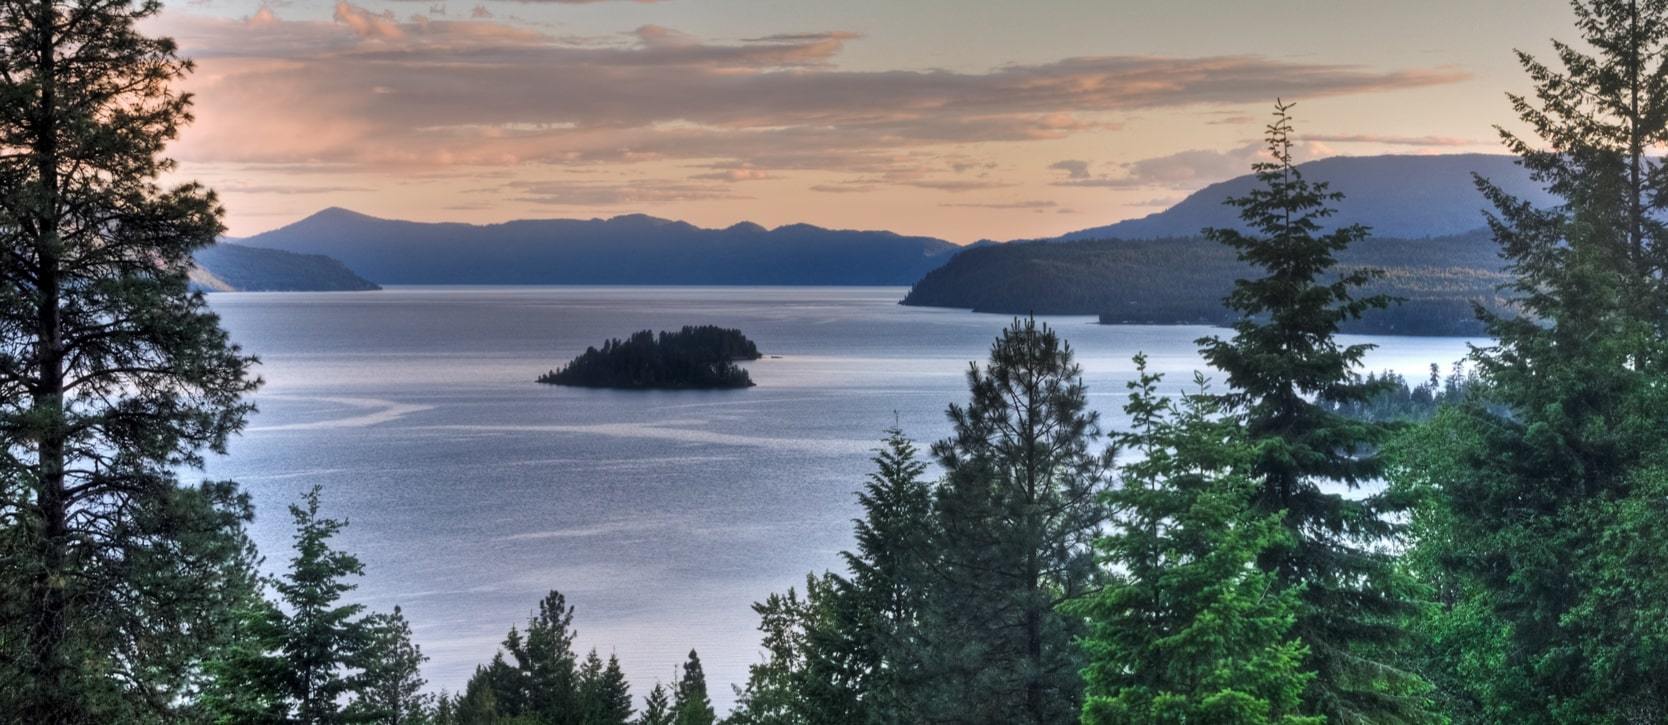 Stunning Lake Pend Oreille with surrounding forestry